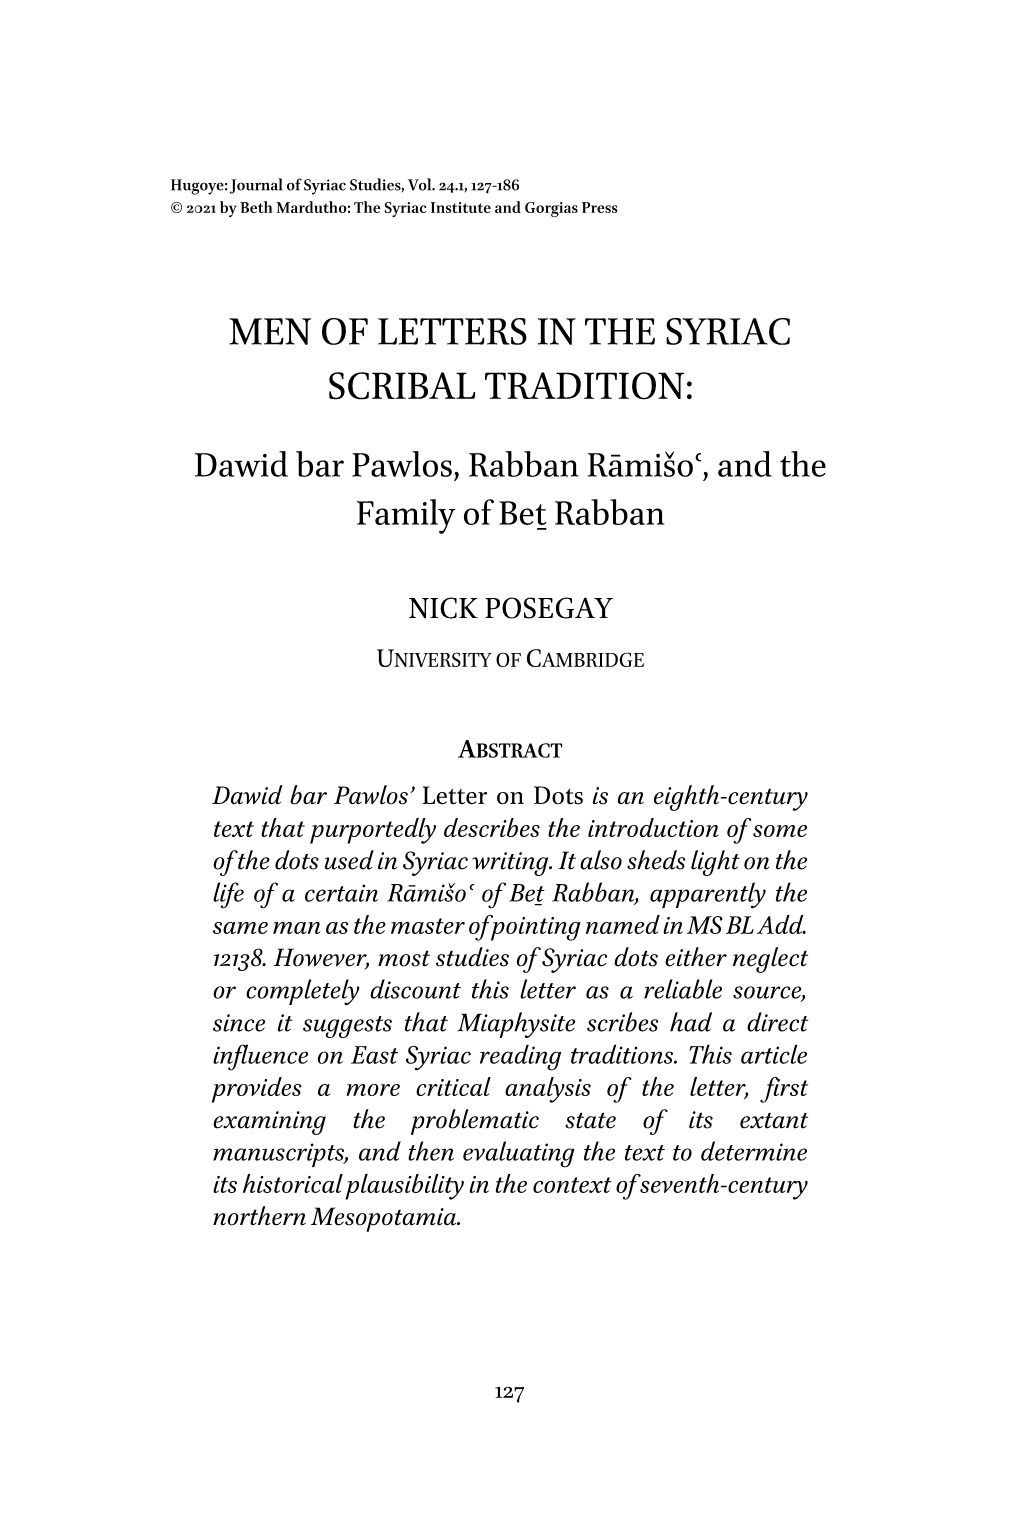 Men of Letters in the Syriac Scribal Tradition